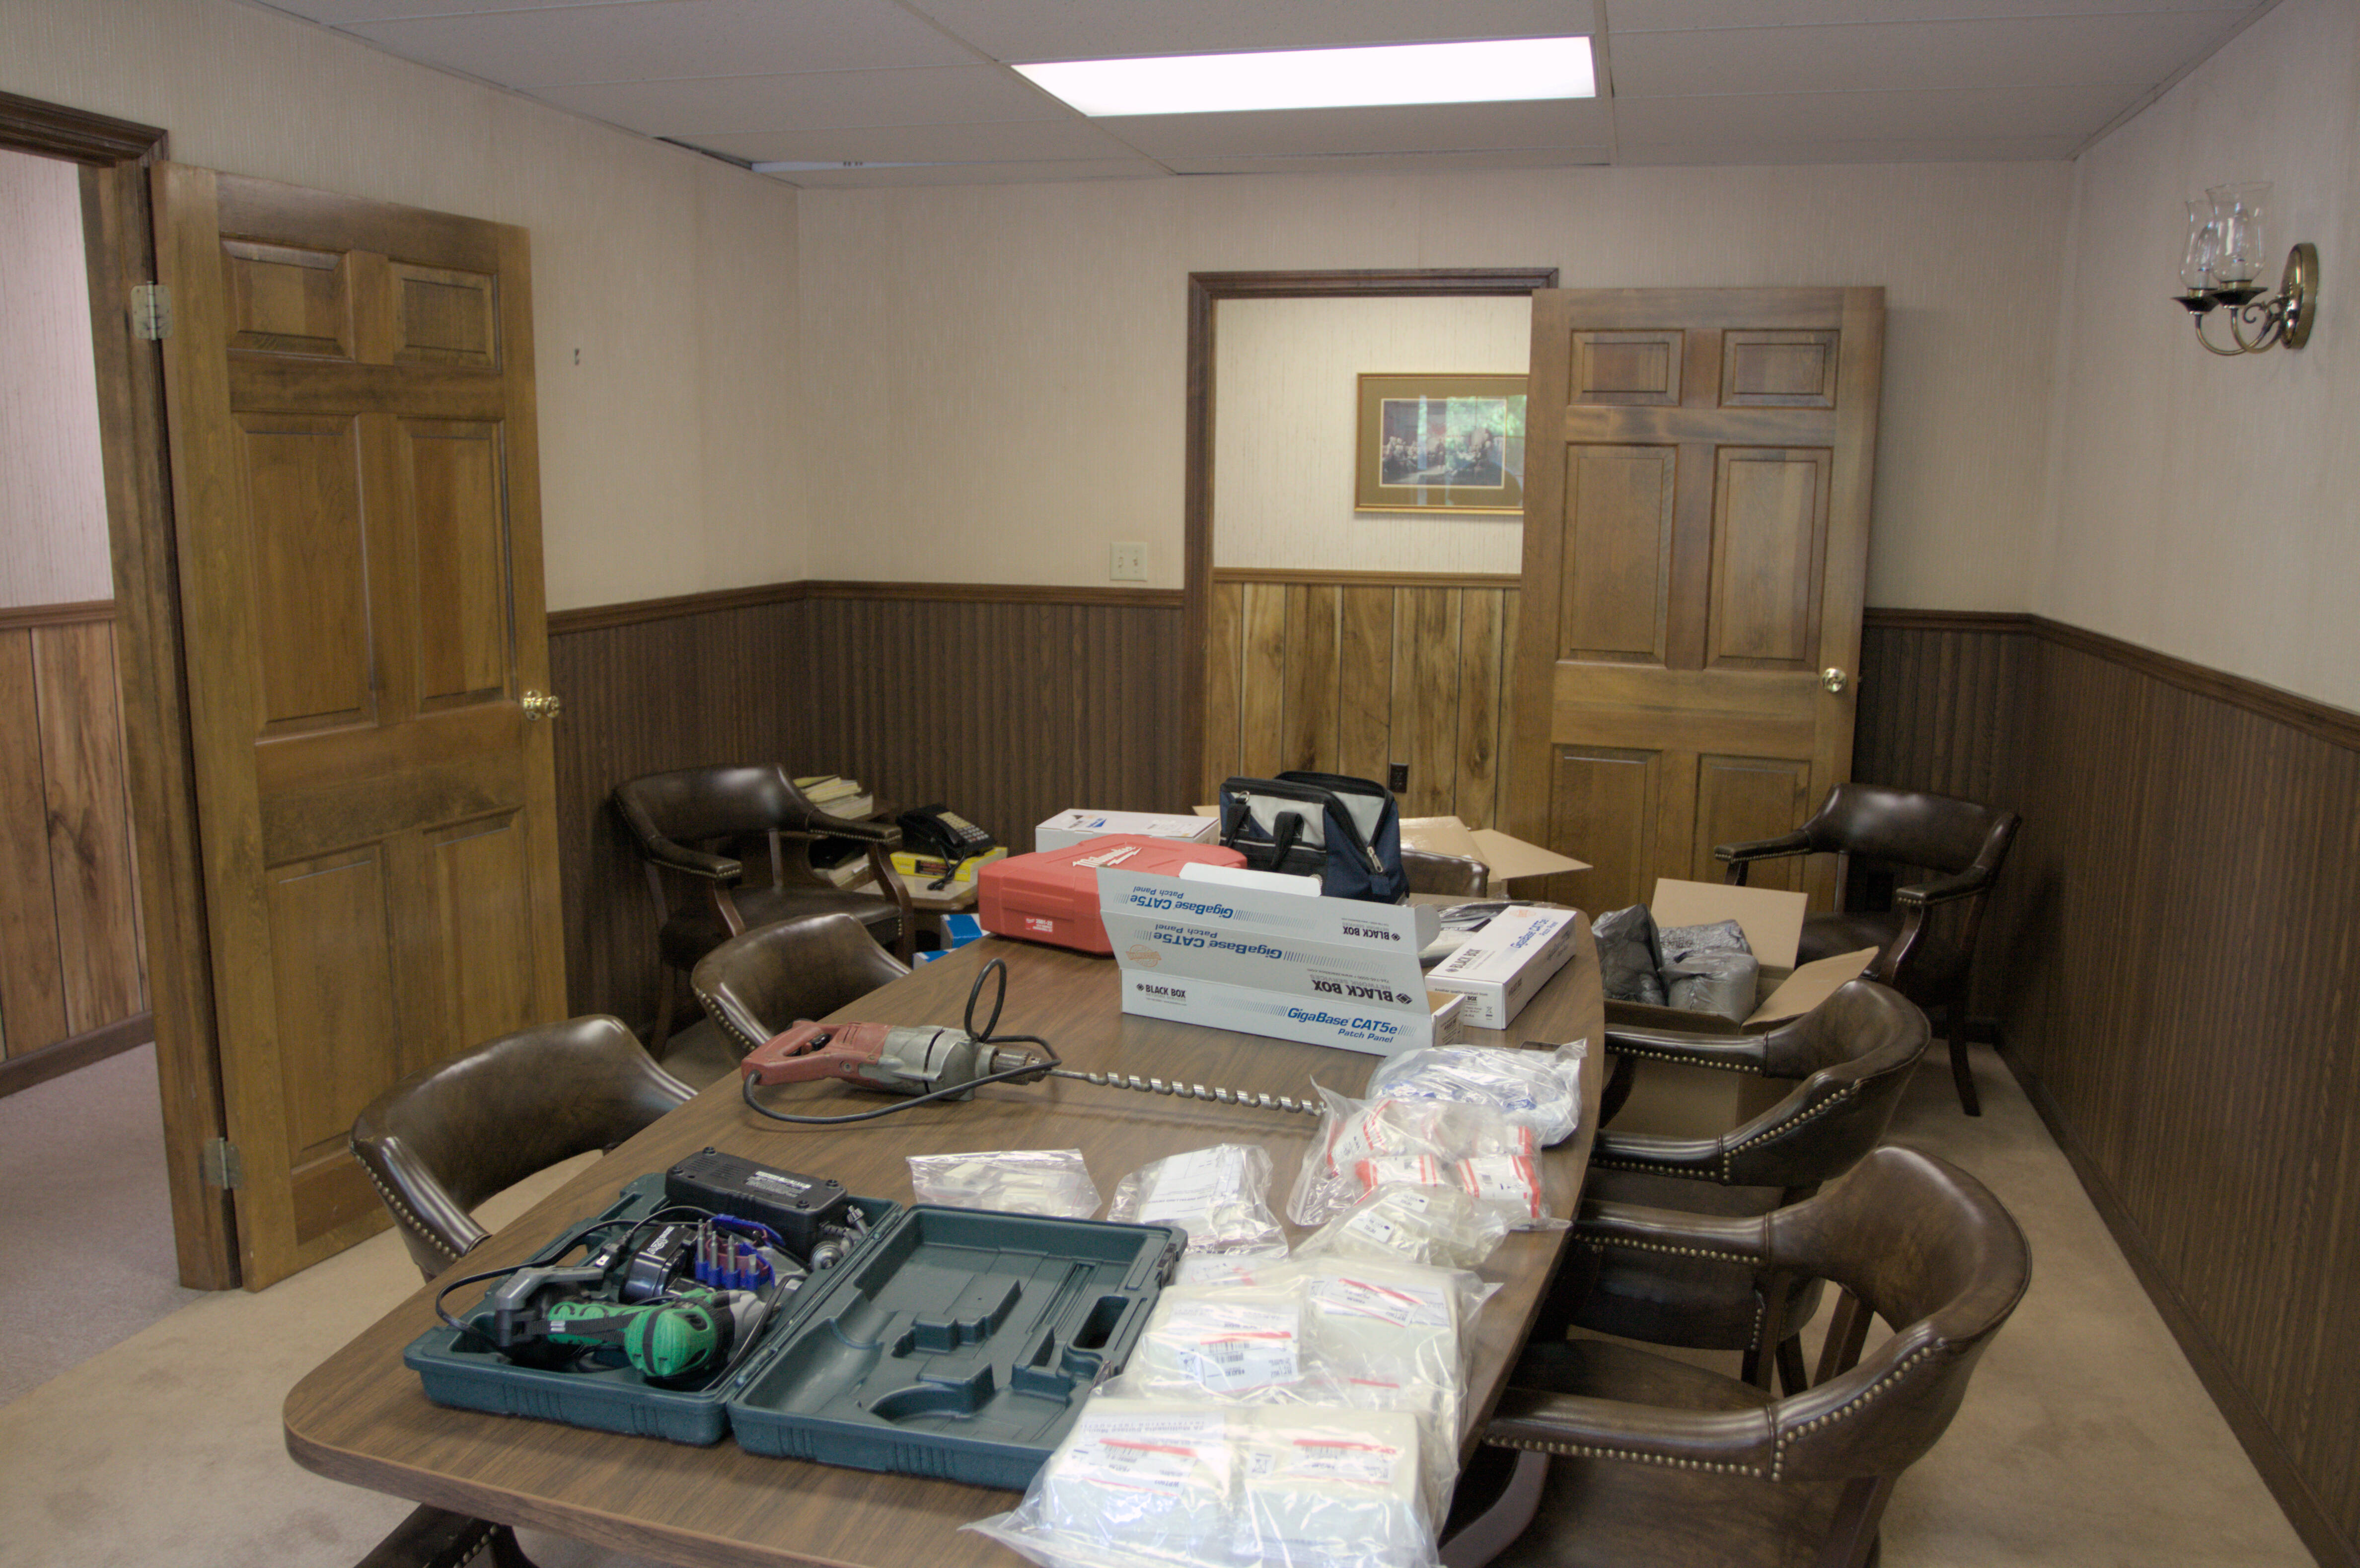 delaware ave conference room with low voltage wiring supplies and tools